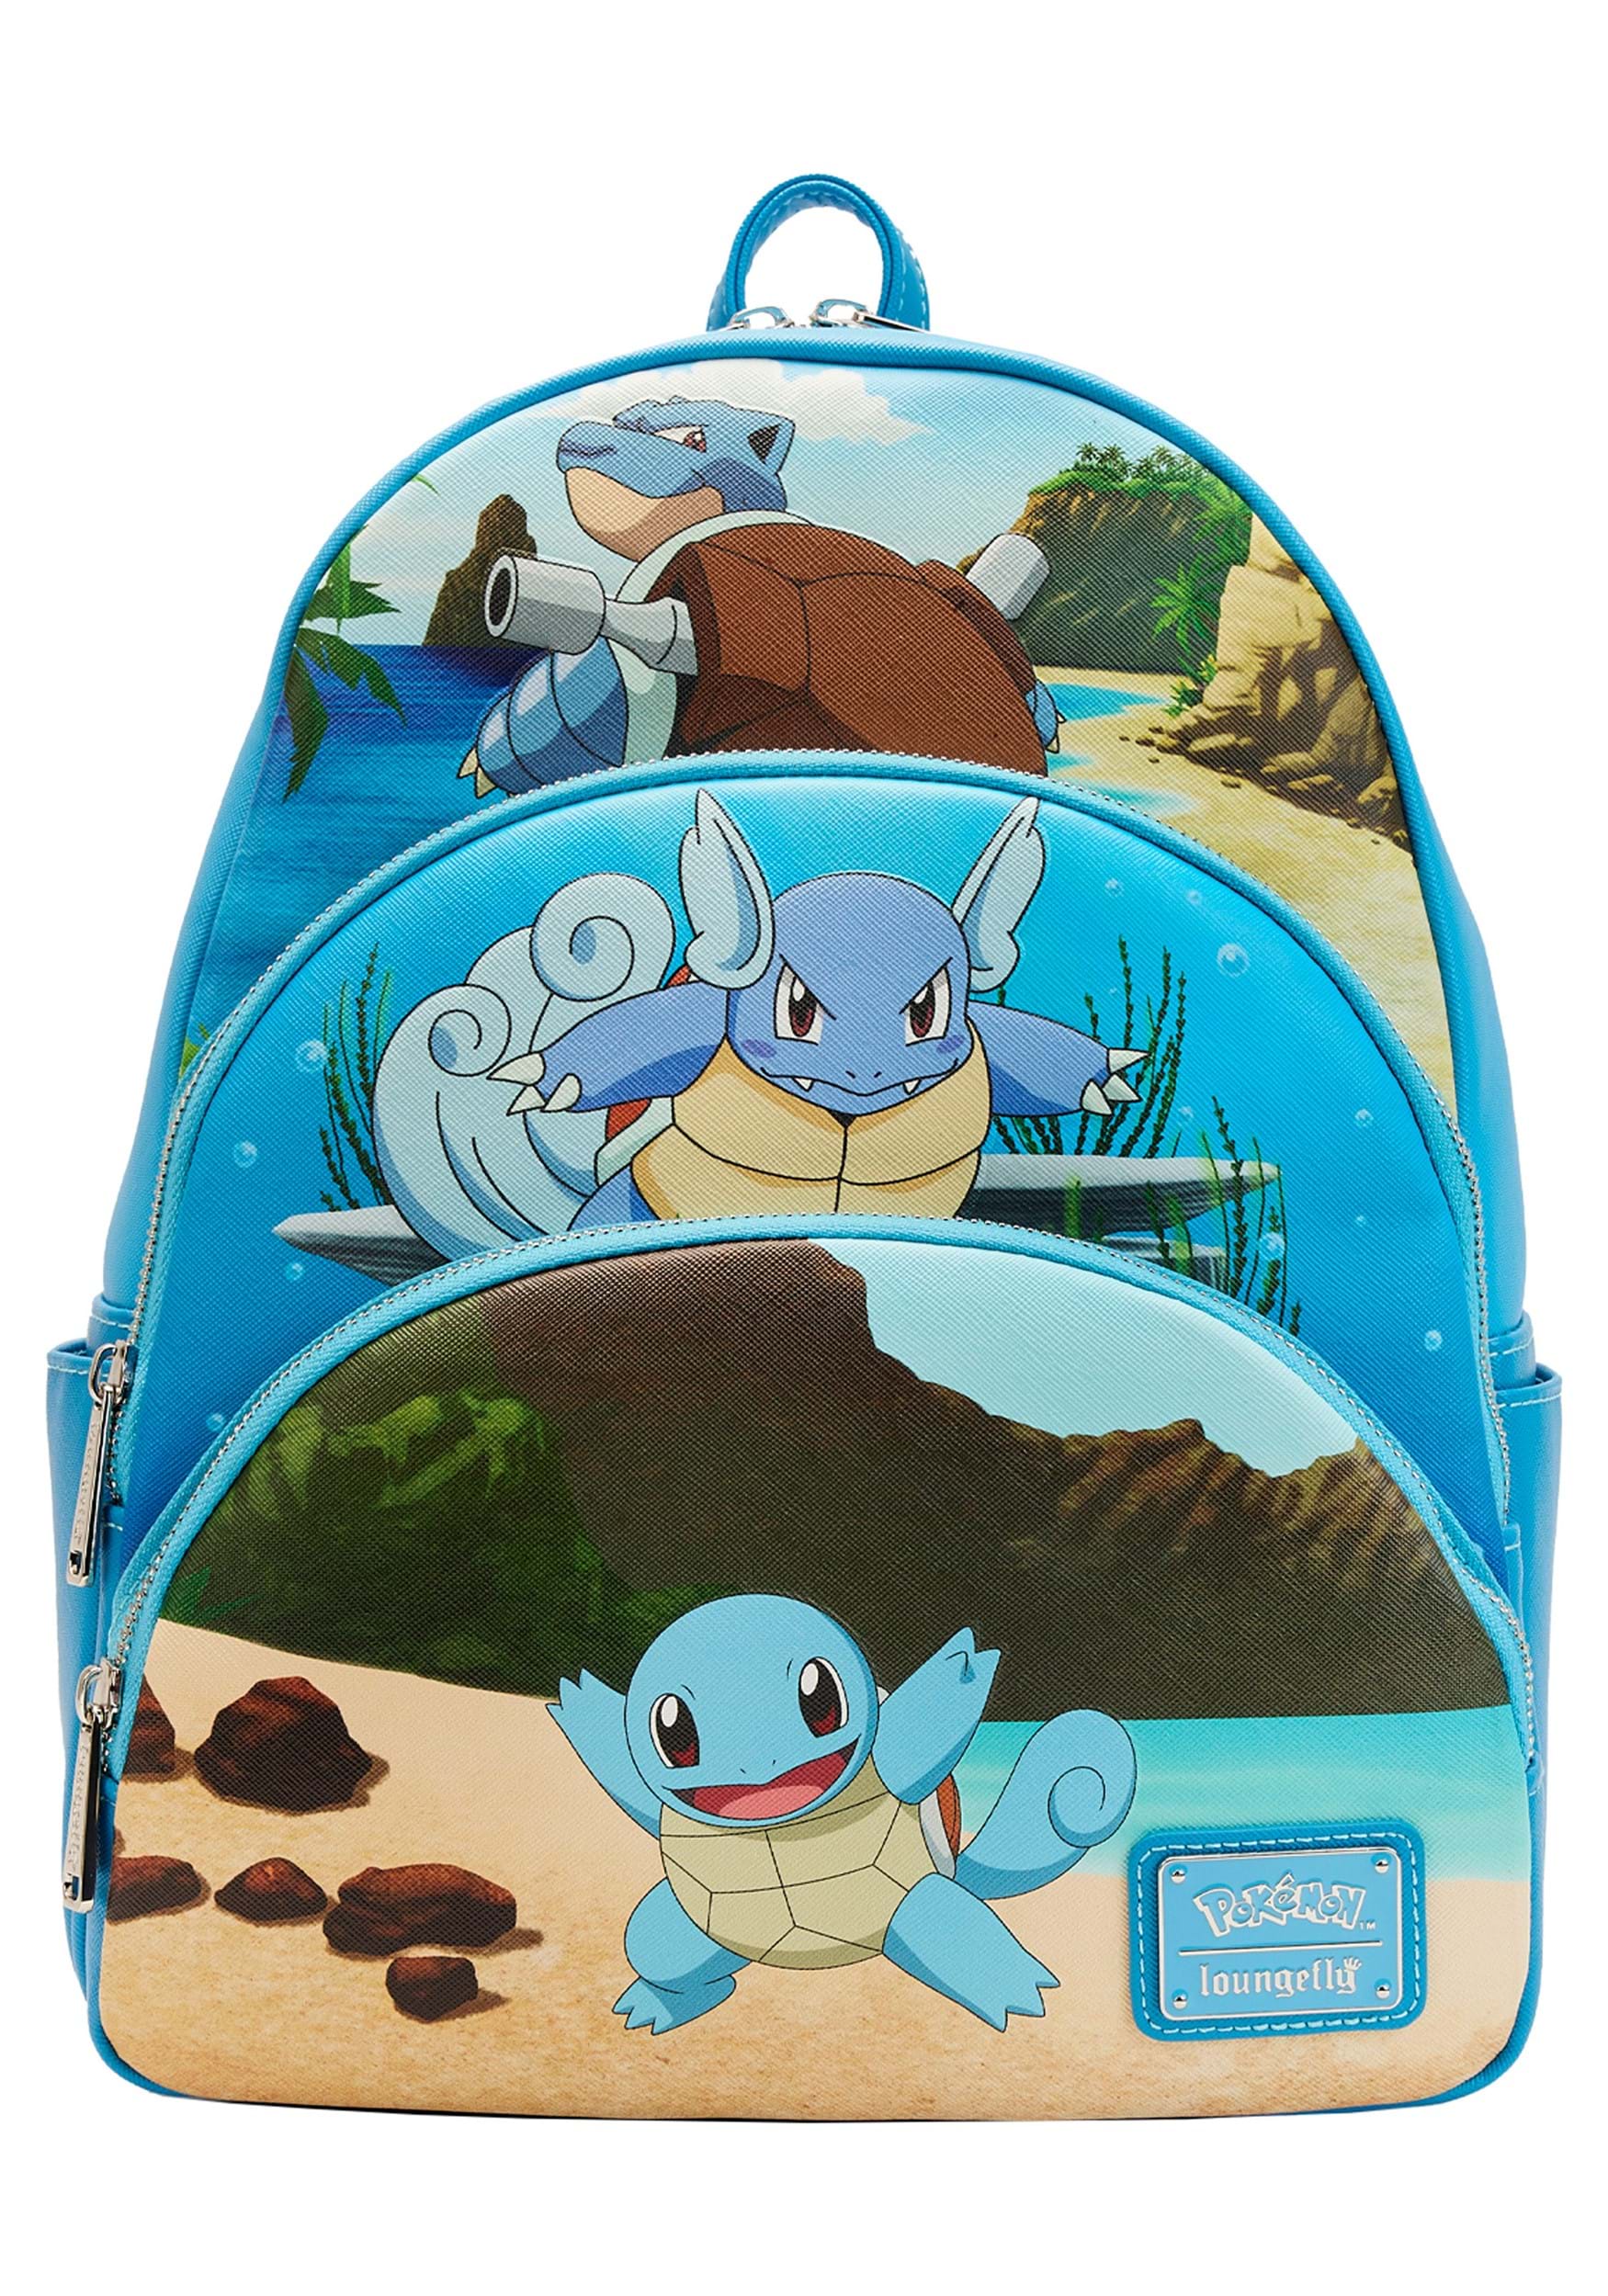 https://images.fun.com/products/90882/1-1/loungefly-pokemon-squirtle-evolution-triple-pocket-backpack.jpg